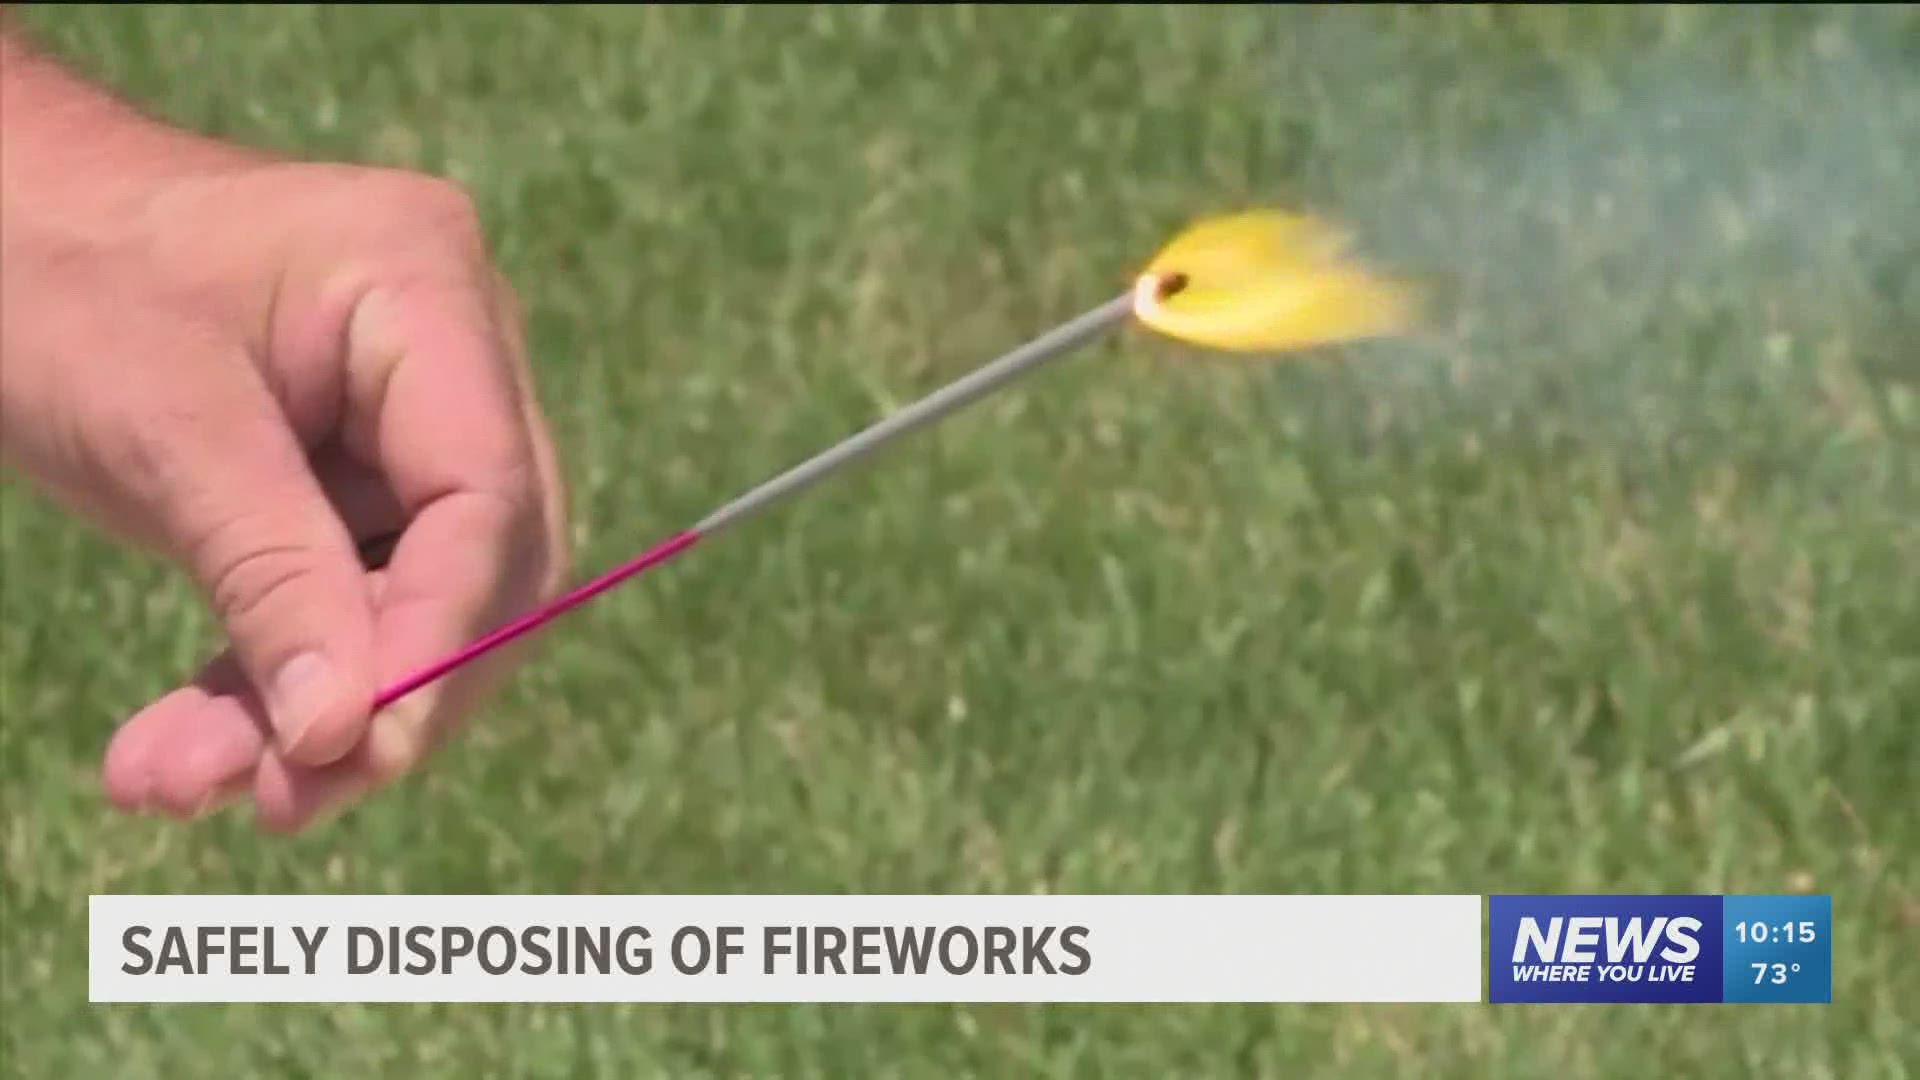 Safely disposing of fireworks.